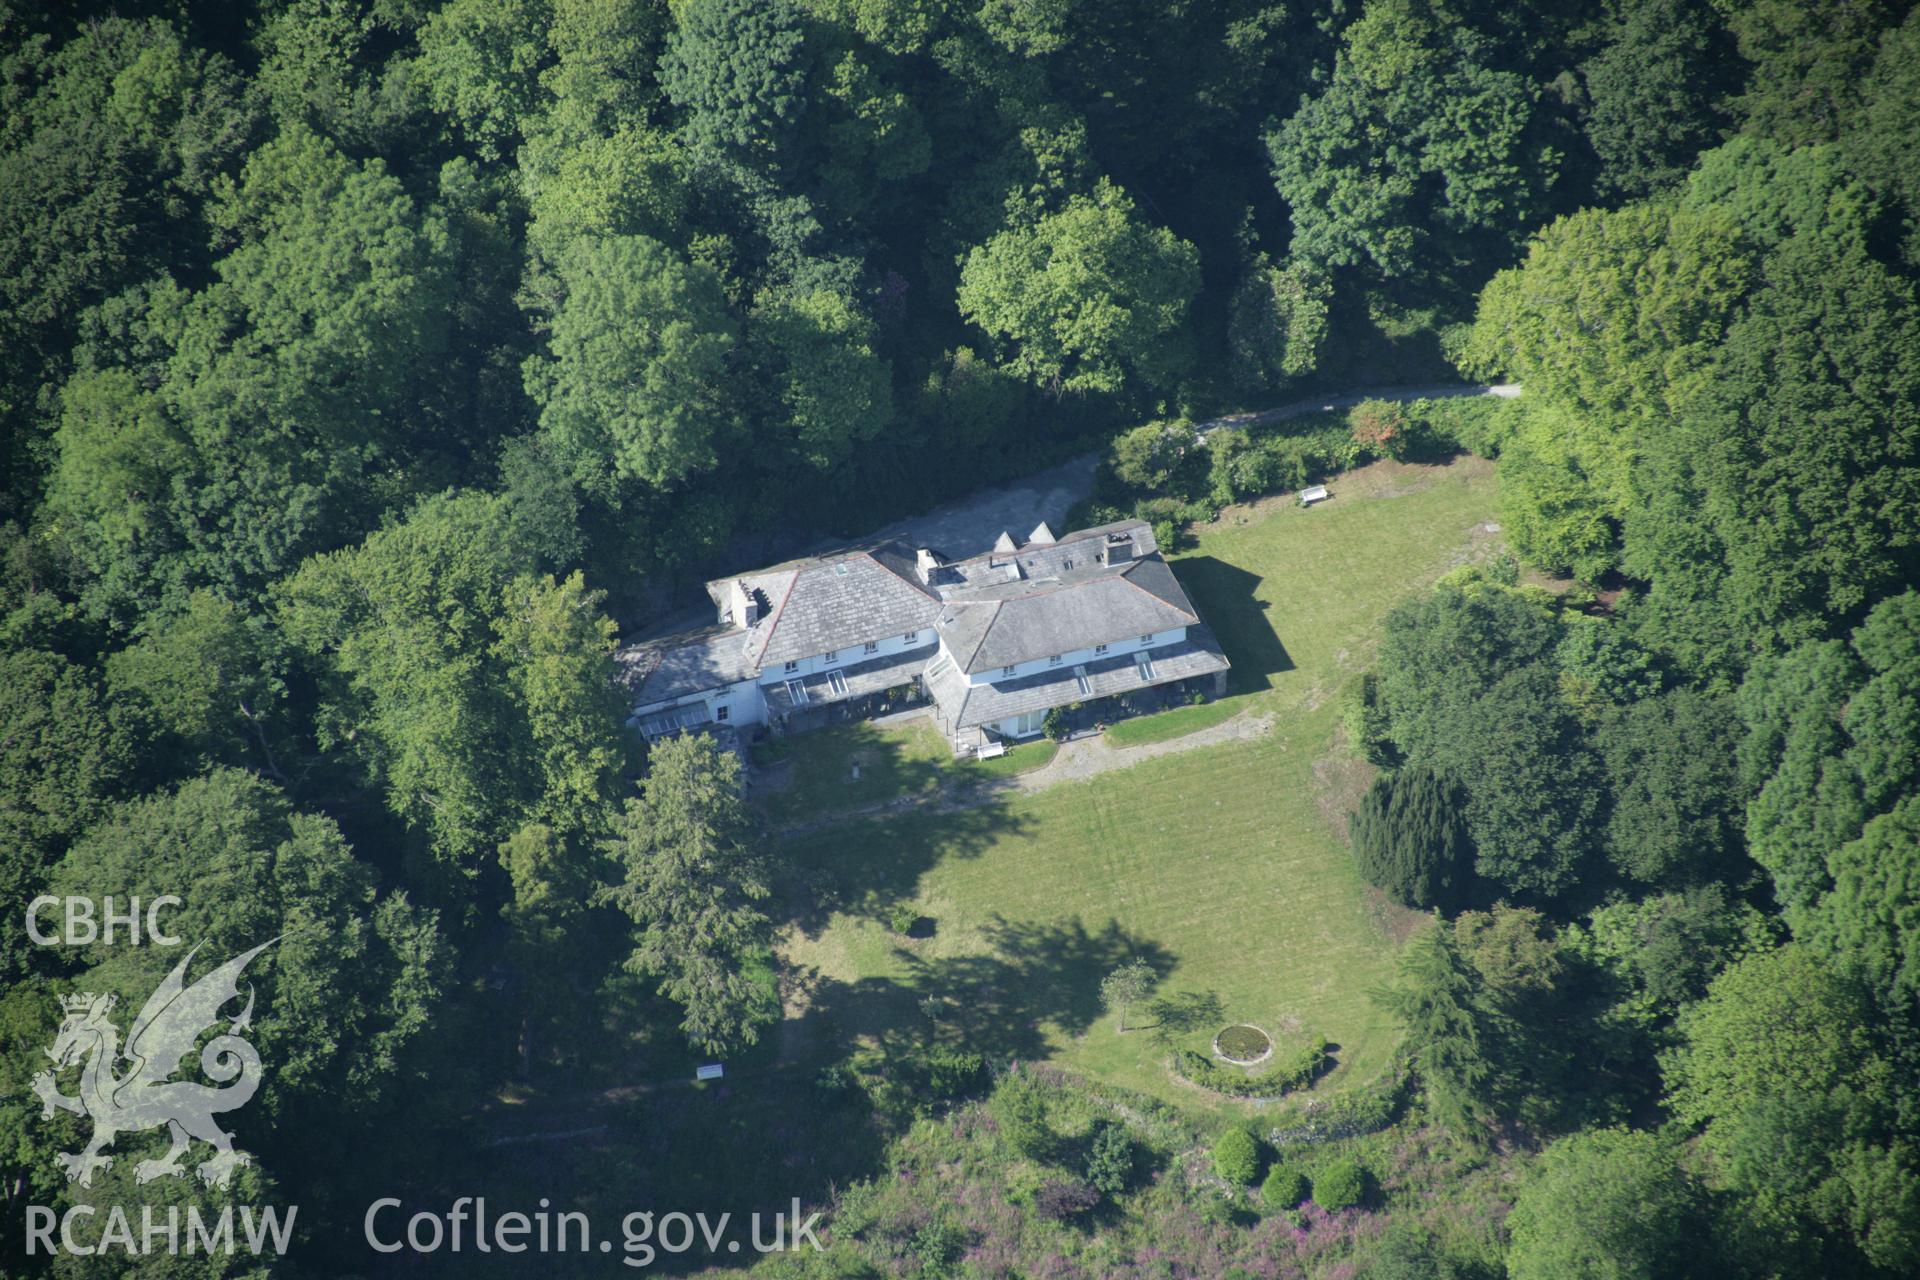 RCAHMW digital colour oblique photograph of Tan-yr-Allt viewed from the south. Taken on 08/06/2005 by T.G. Driver.